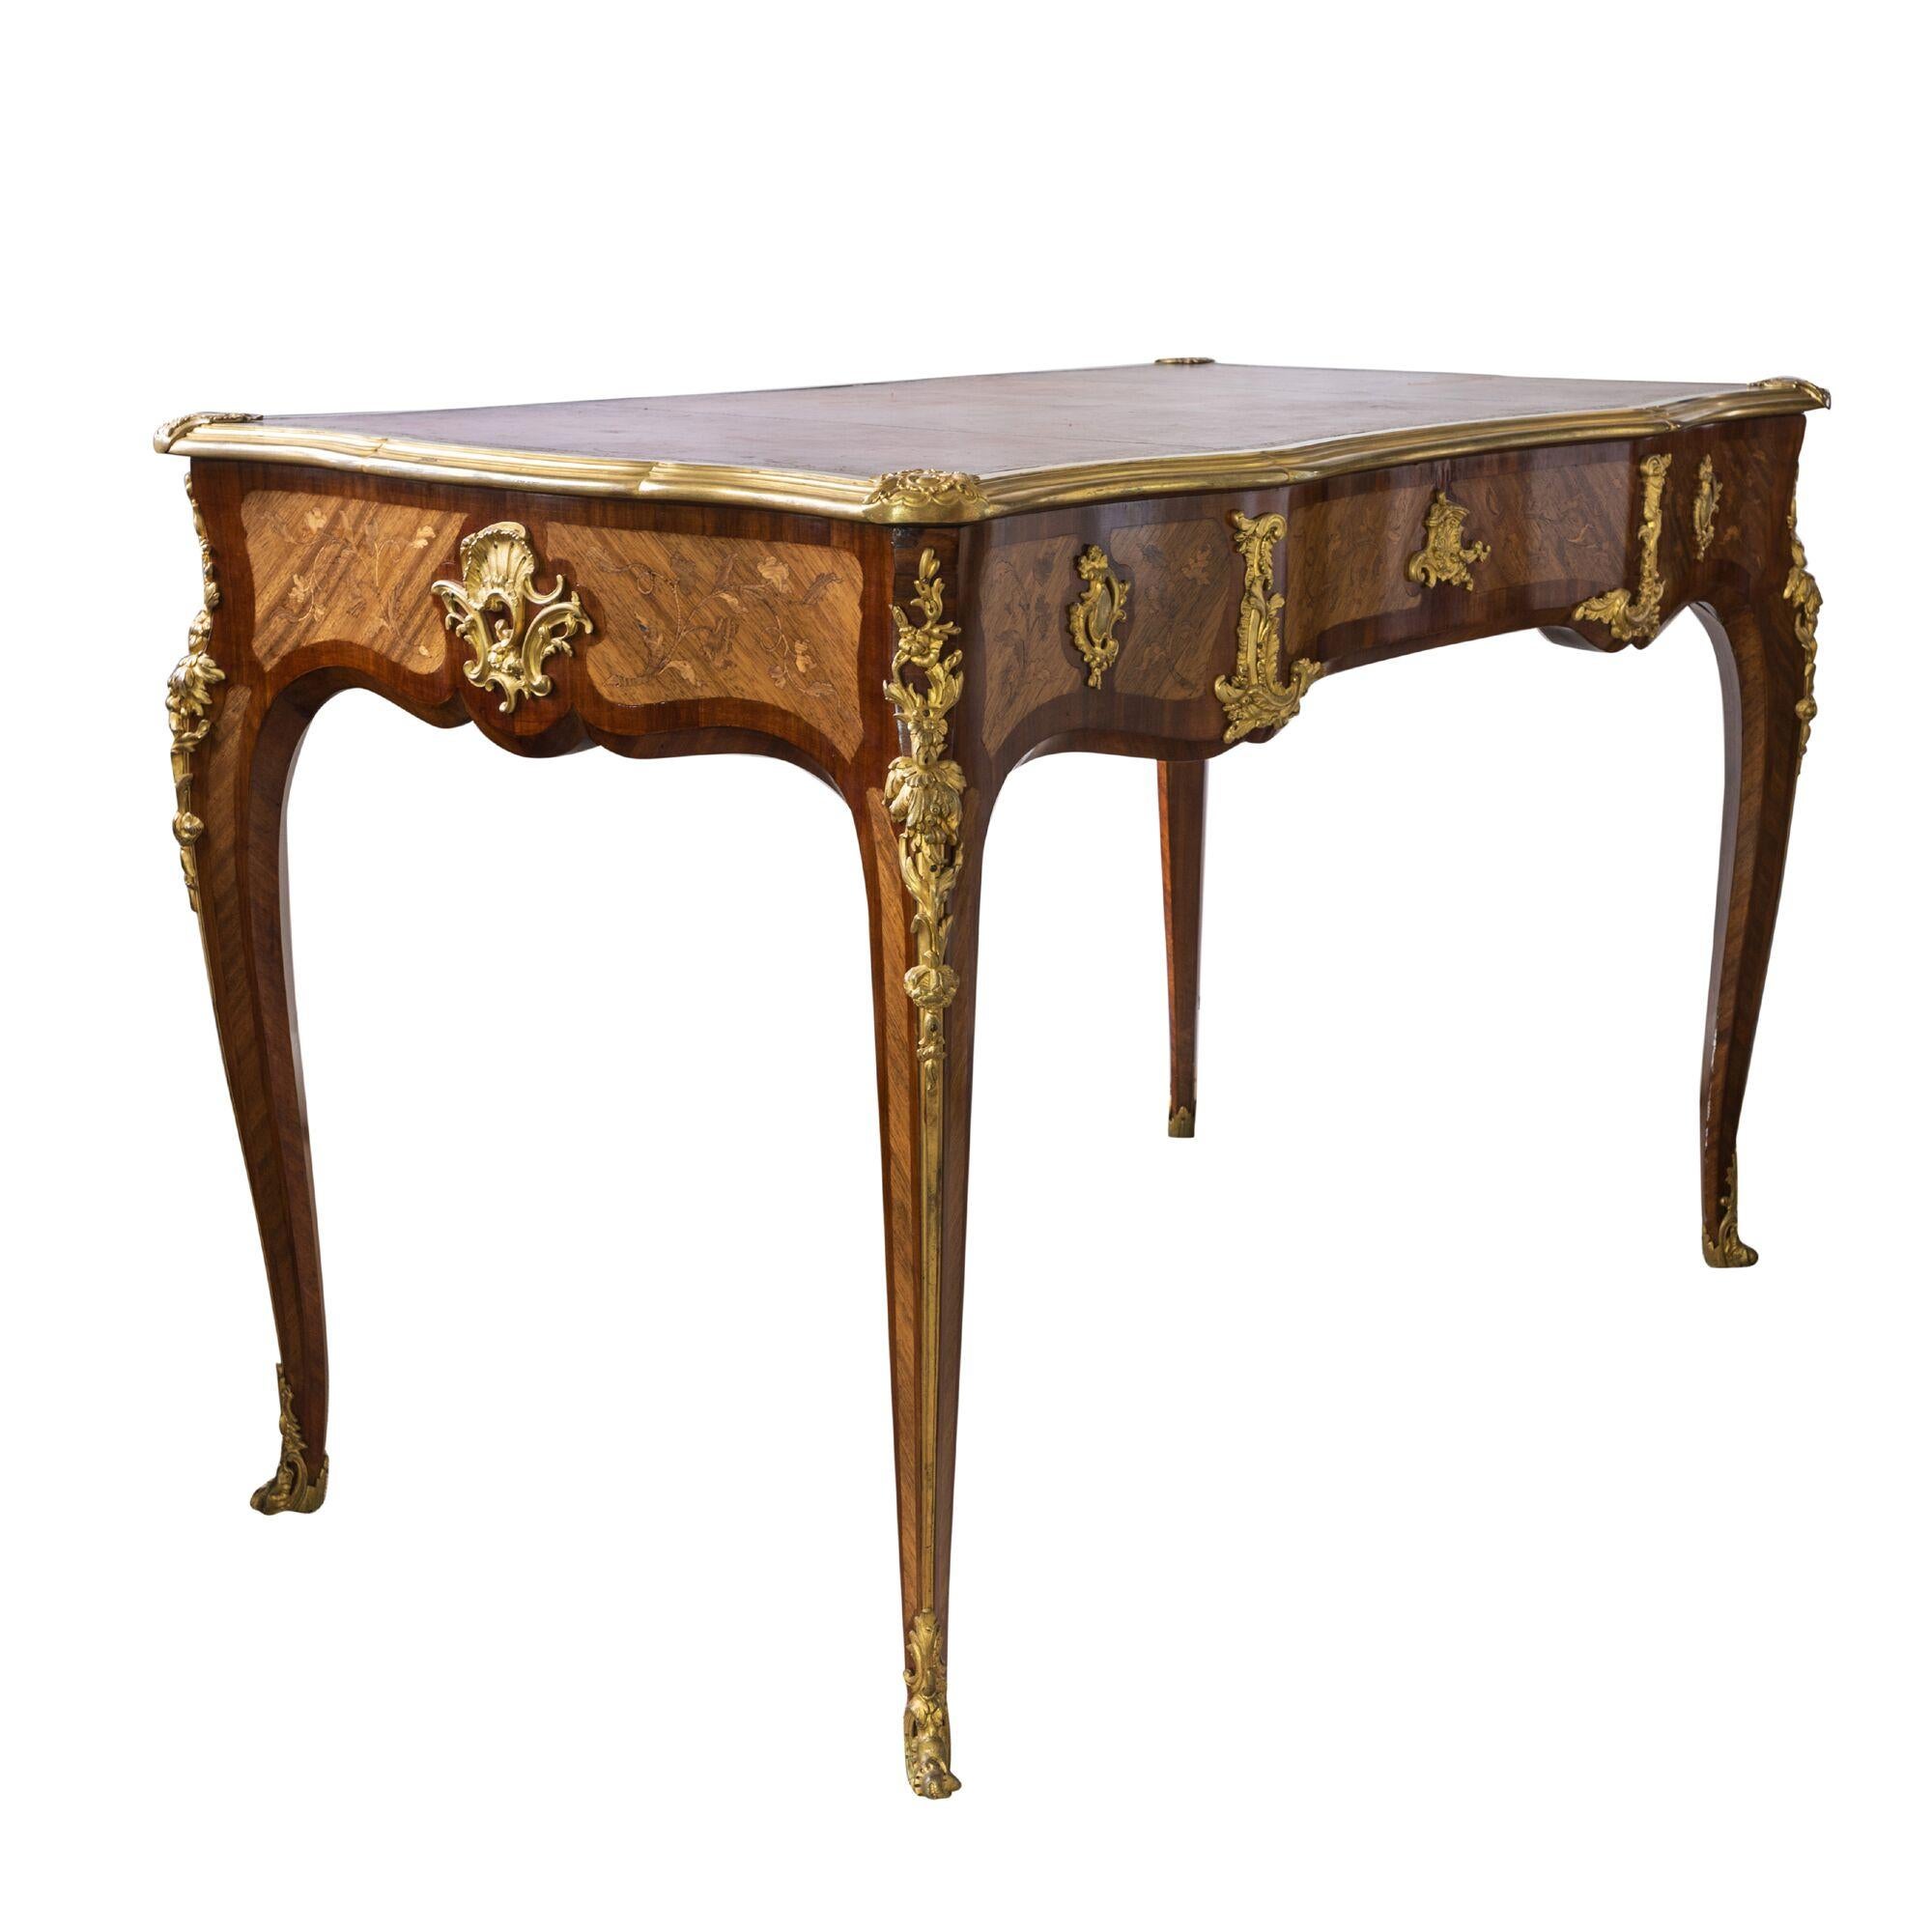 Paul Sormani Louis XIV style bureau plat.
French, circa 1870.
The lockplate to the central drawer signed Paul Sormani/10 r. Charlot. Paris.
The shaped rectangular top inset with red tooled leather and closed by gilt bronze border above three